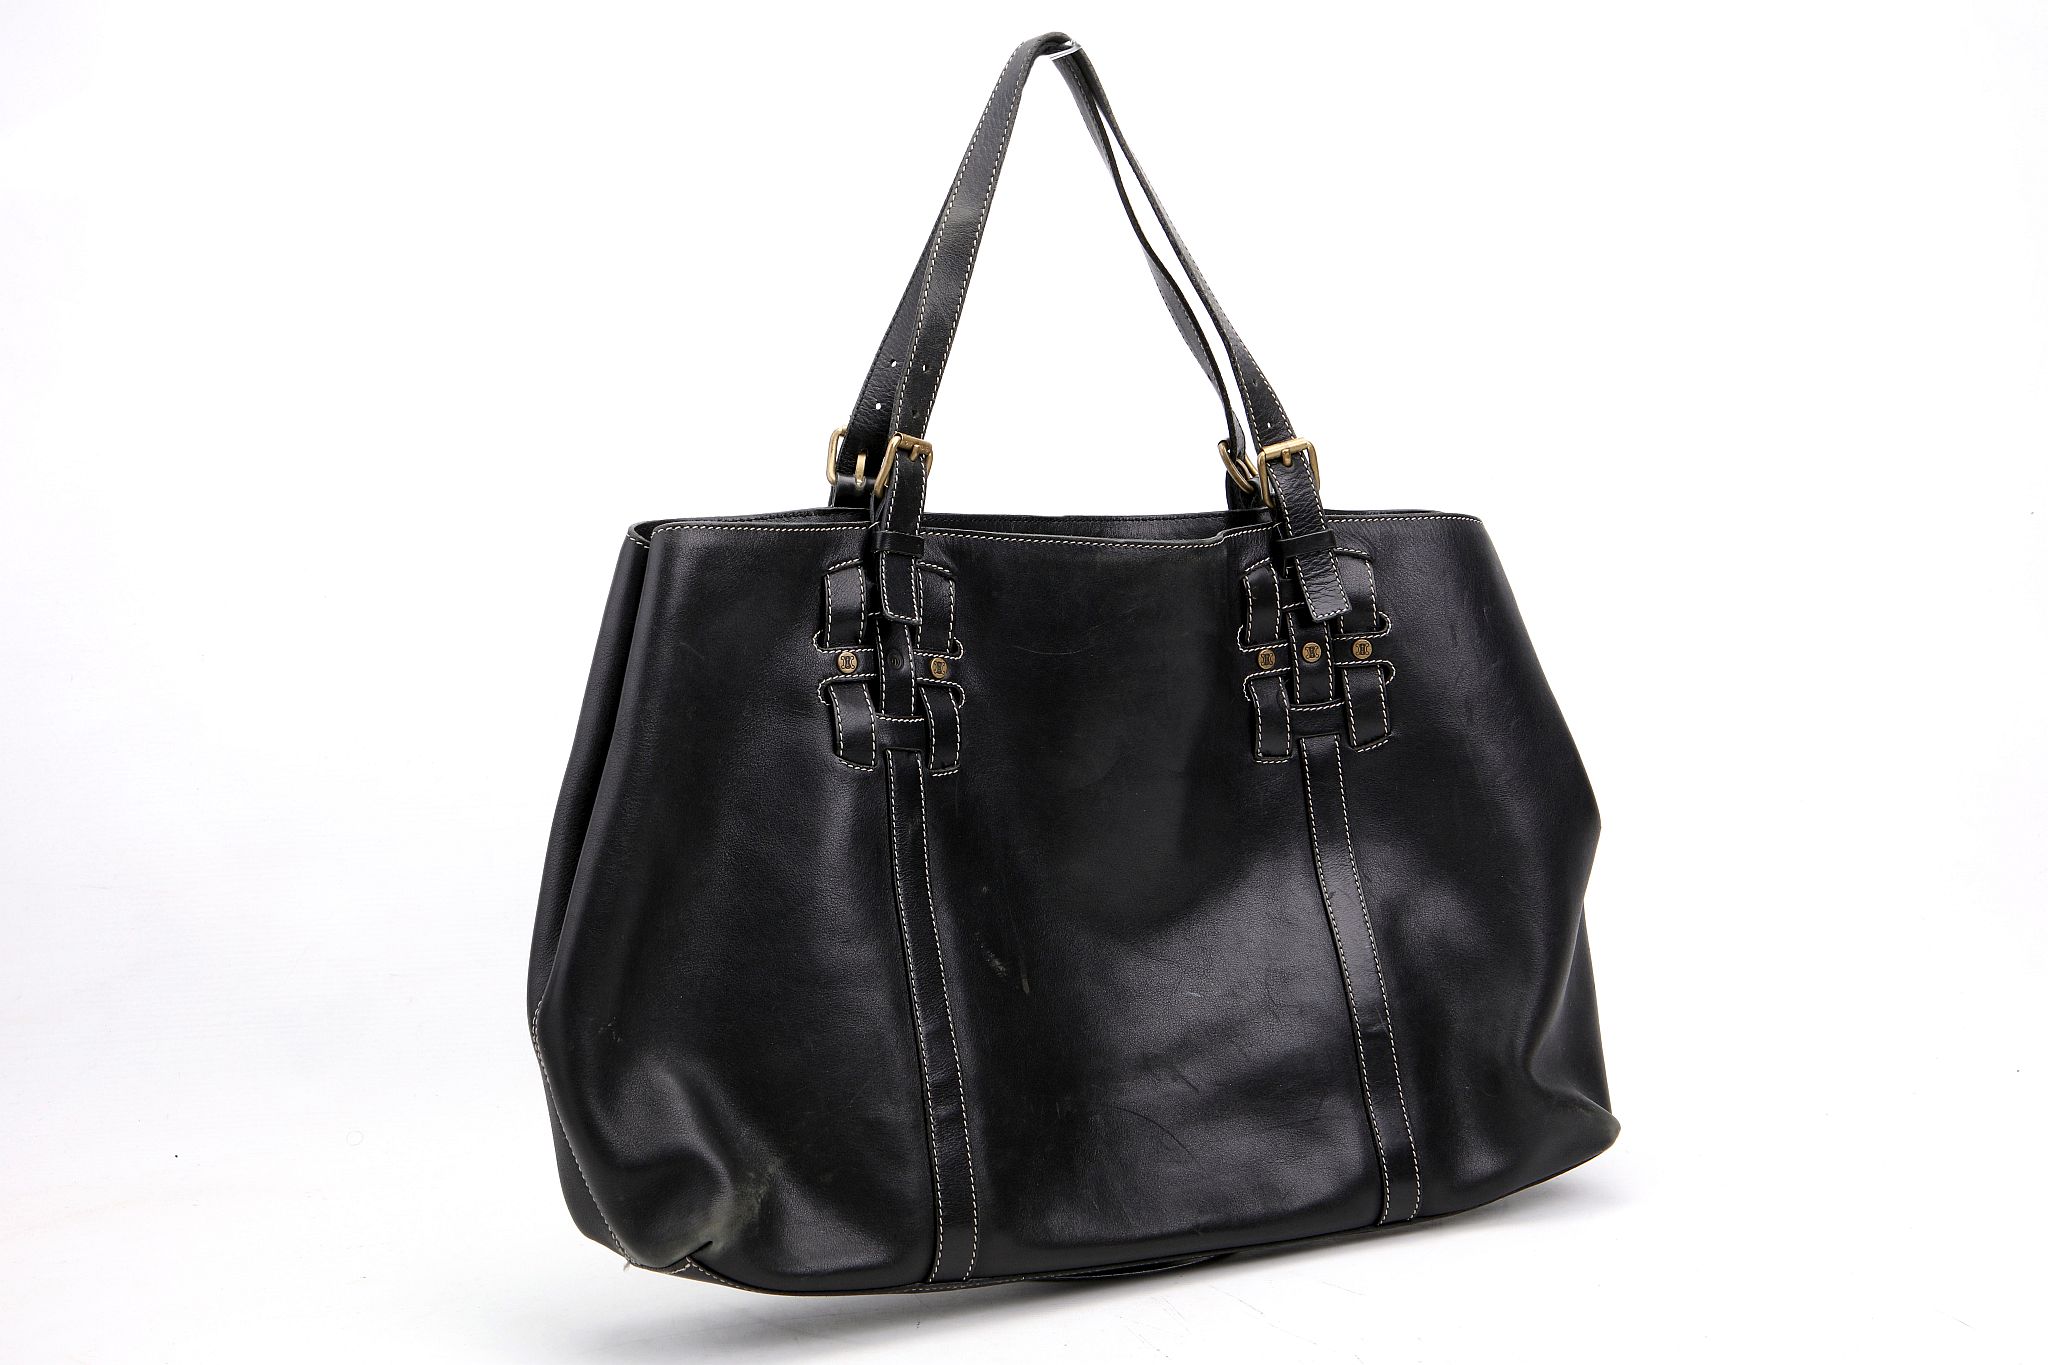 CELINE SHOPPER, black leather with white stitching, brass hardware, 48cm wide, 30cm high - Image 2 of 10